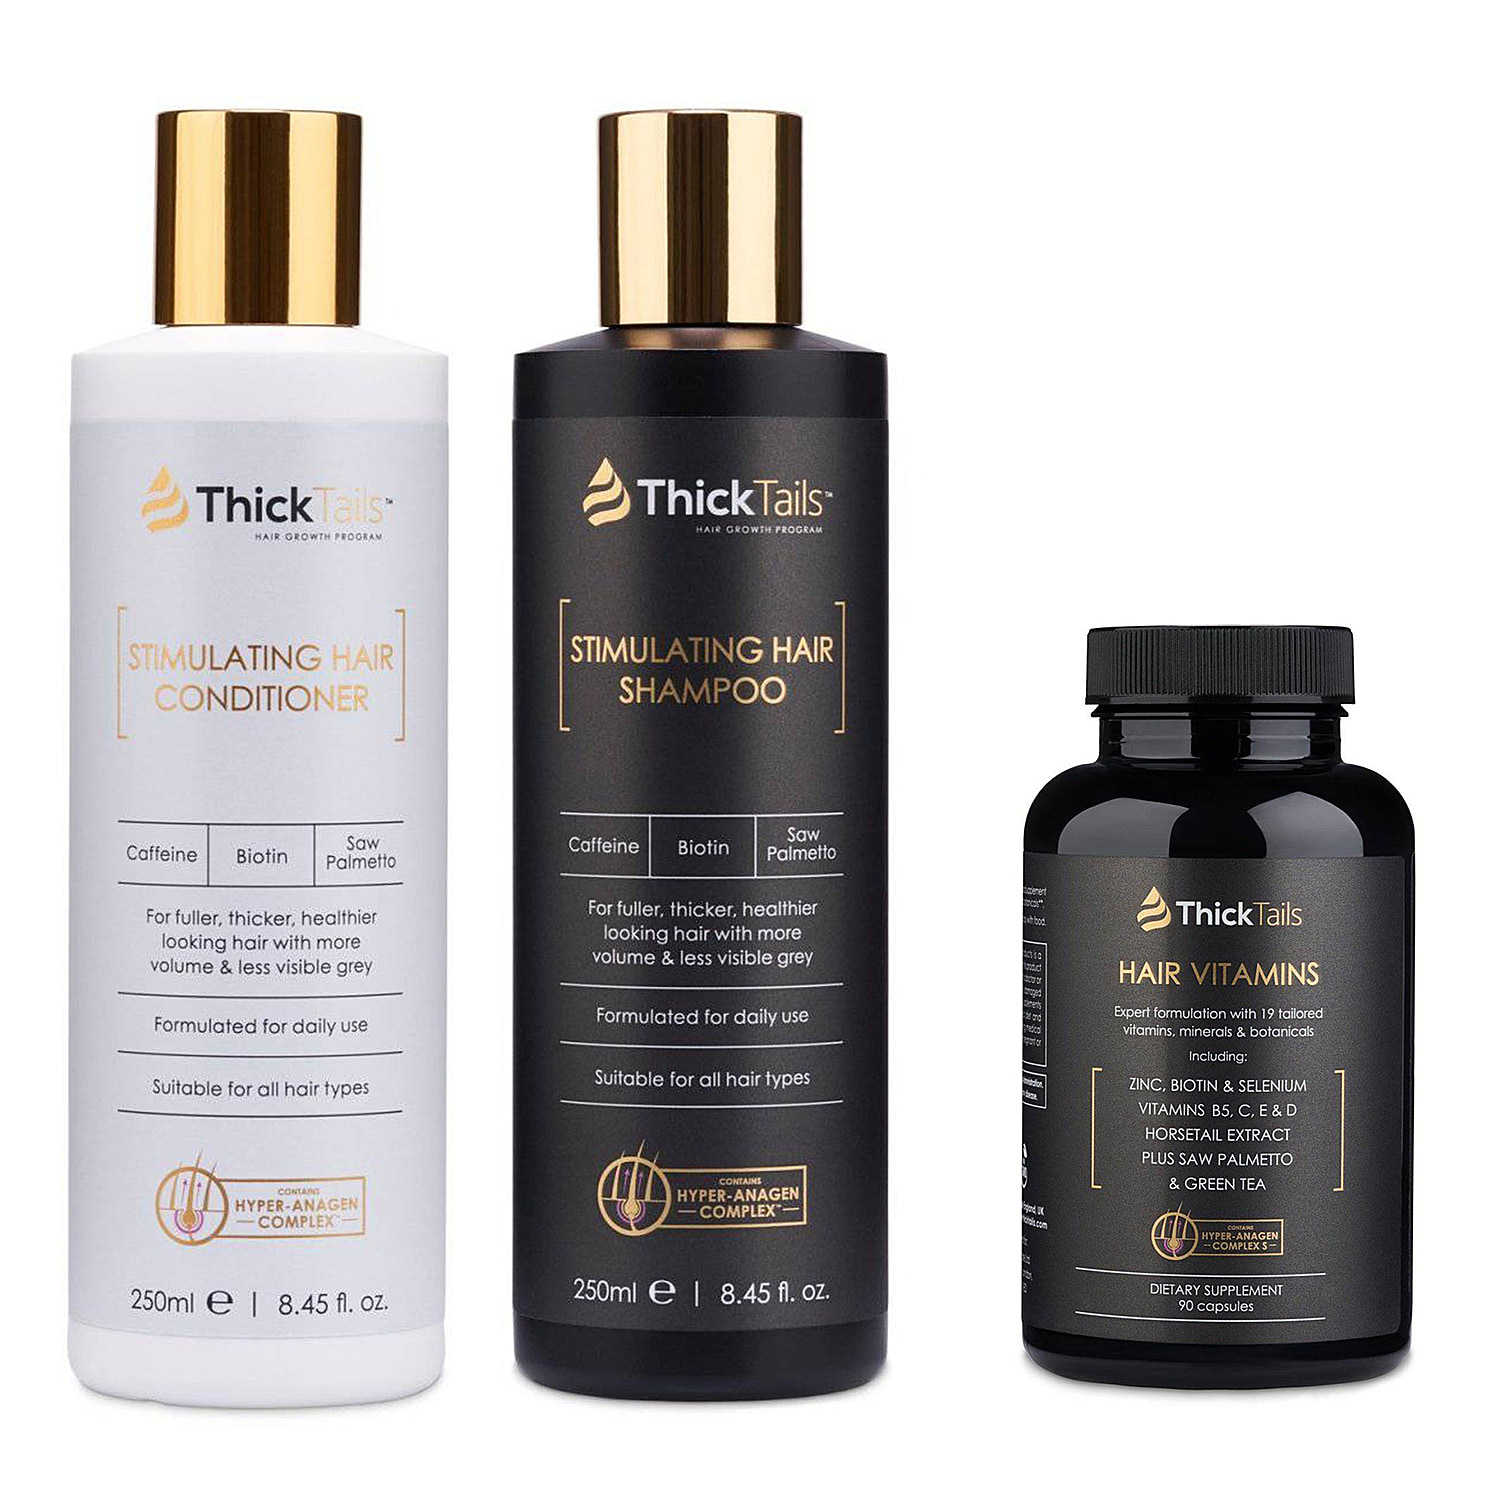 Thick-Tails-Hair-Care-Set-1-pc